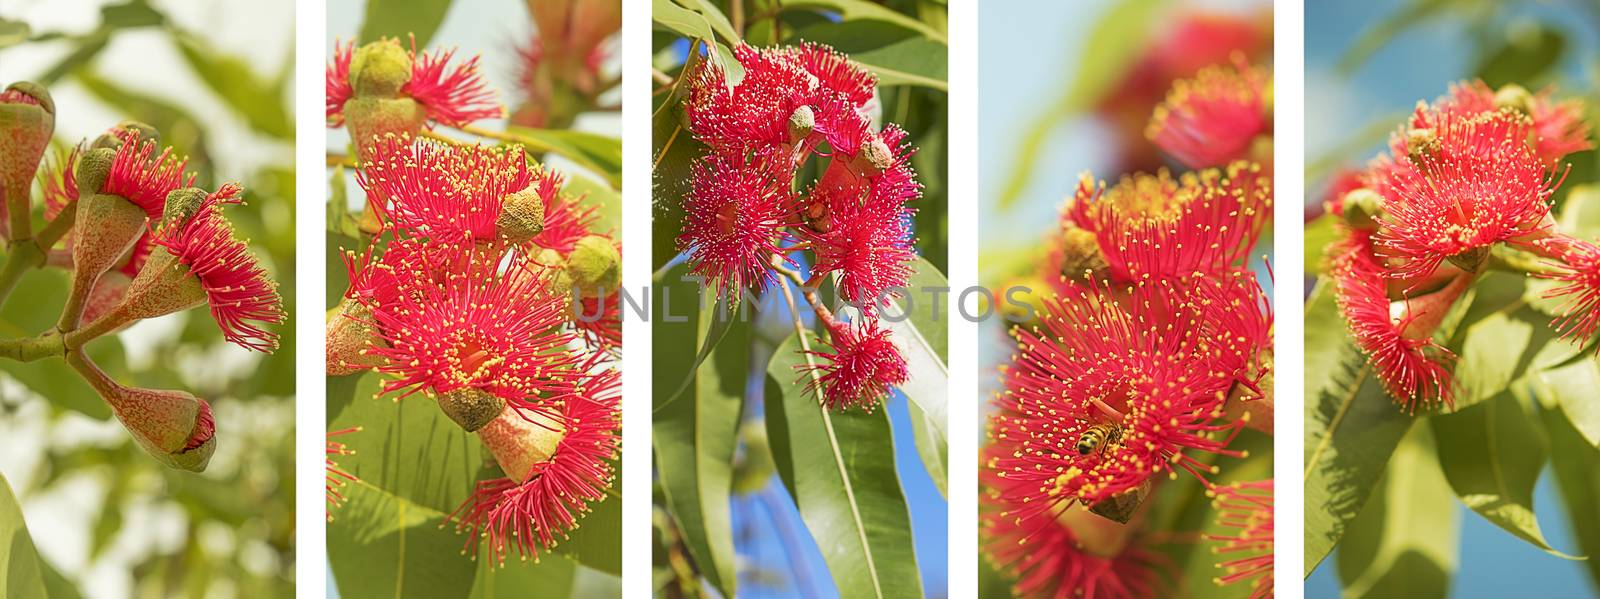 Australian Panoramic nature banner with set of red eucalyptus flower photo elements in white frame